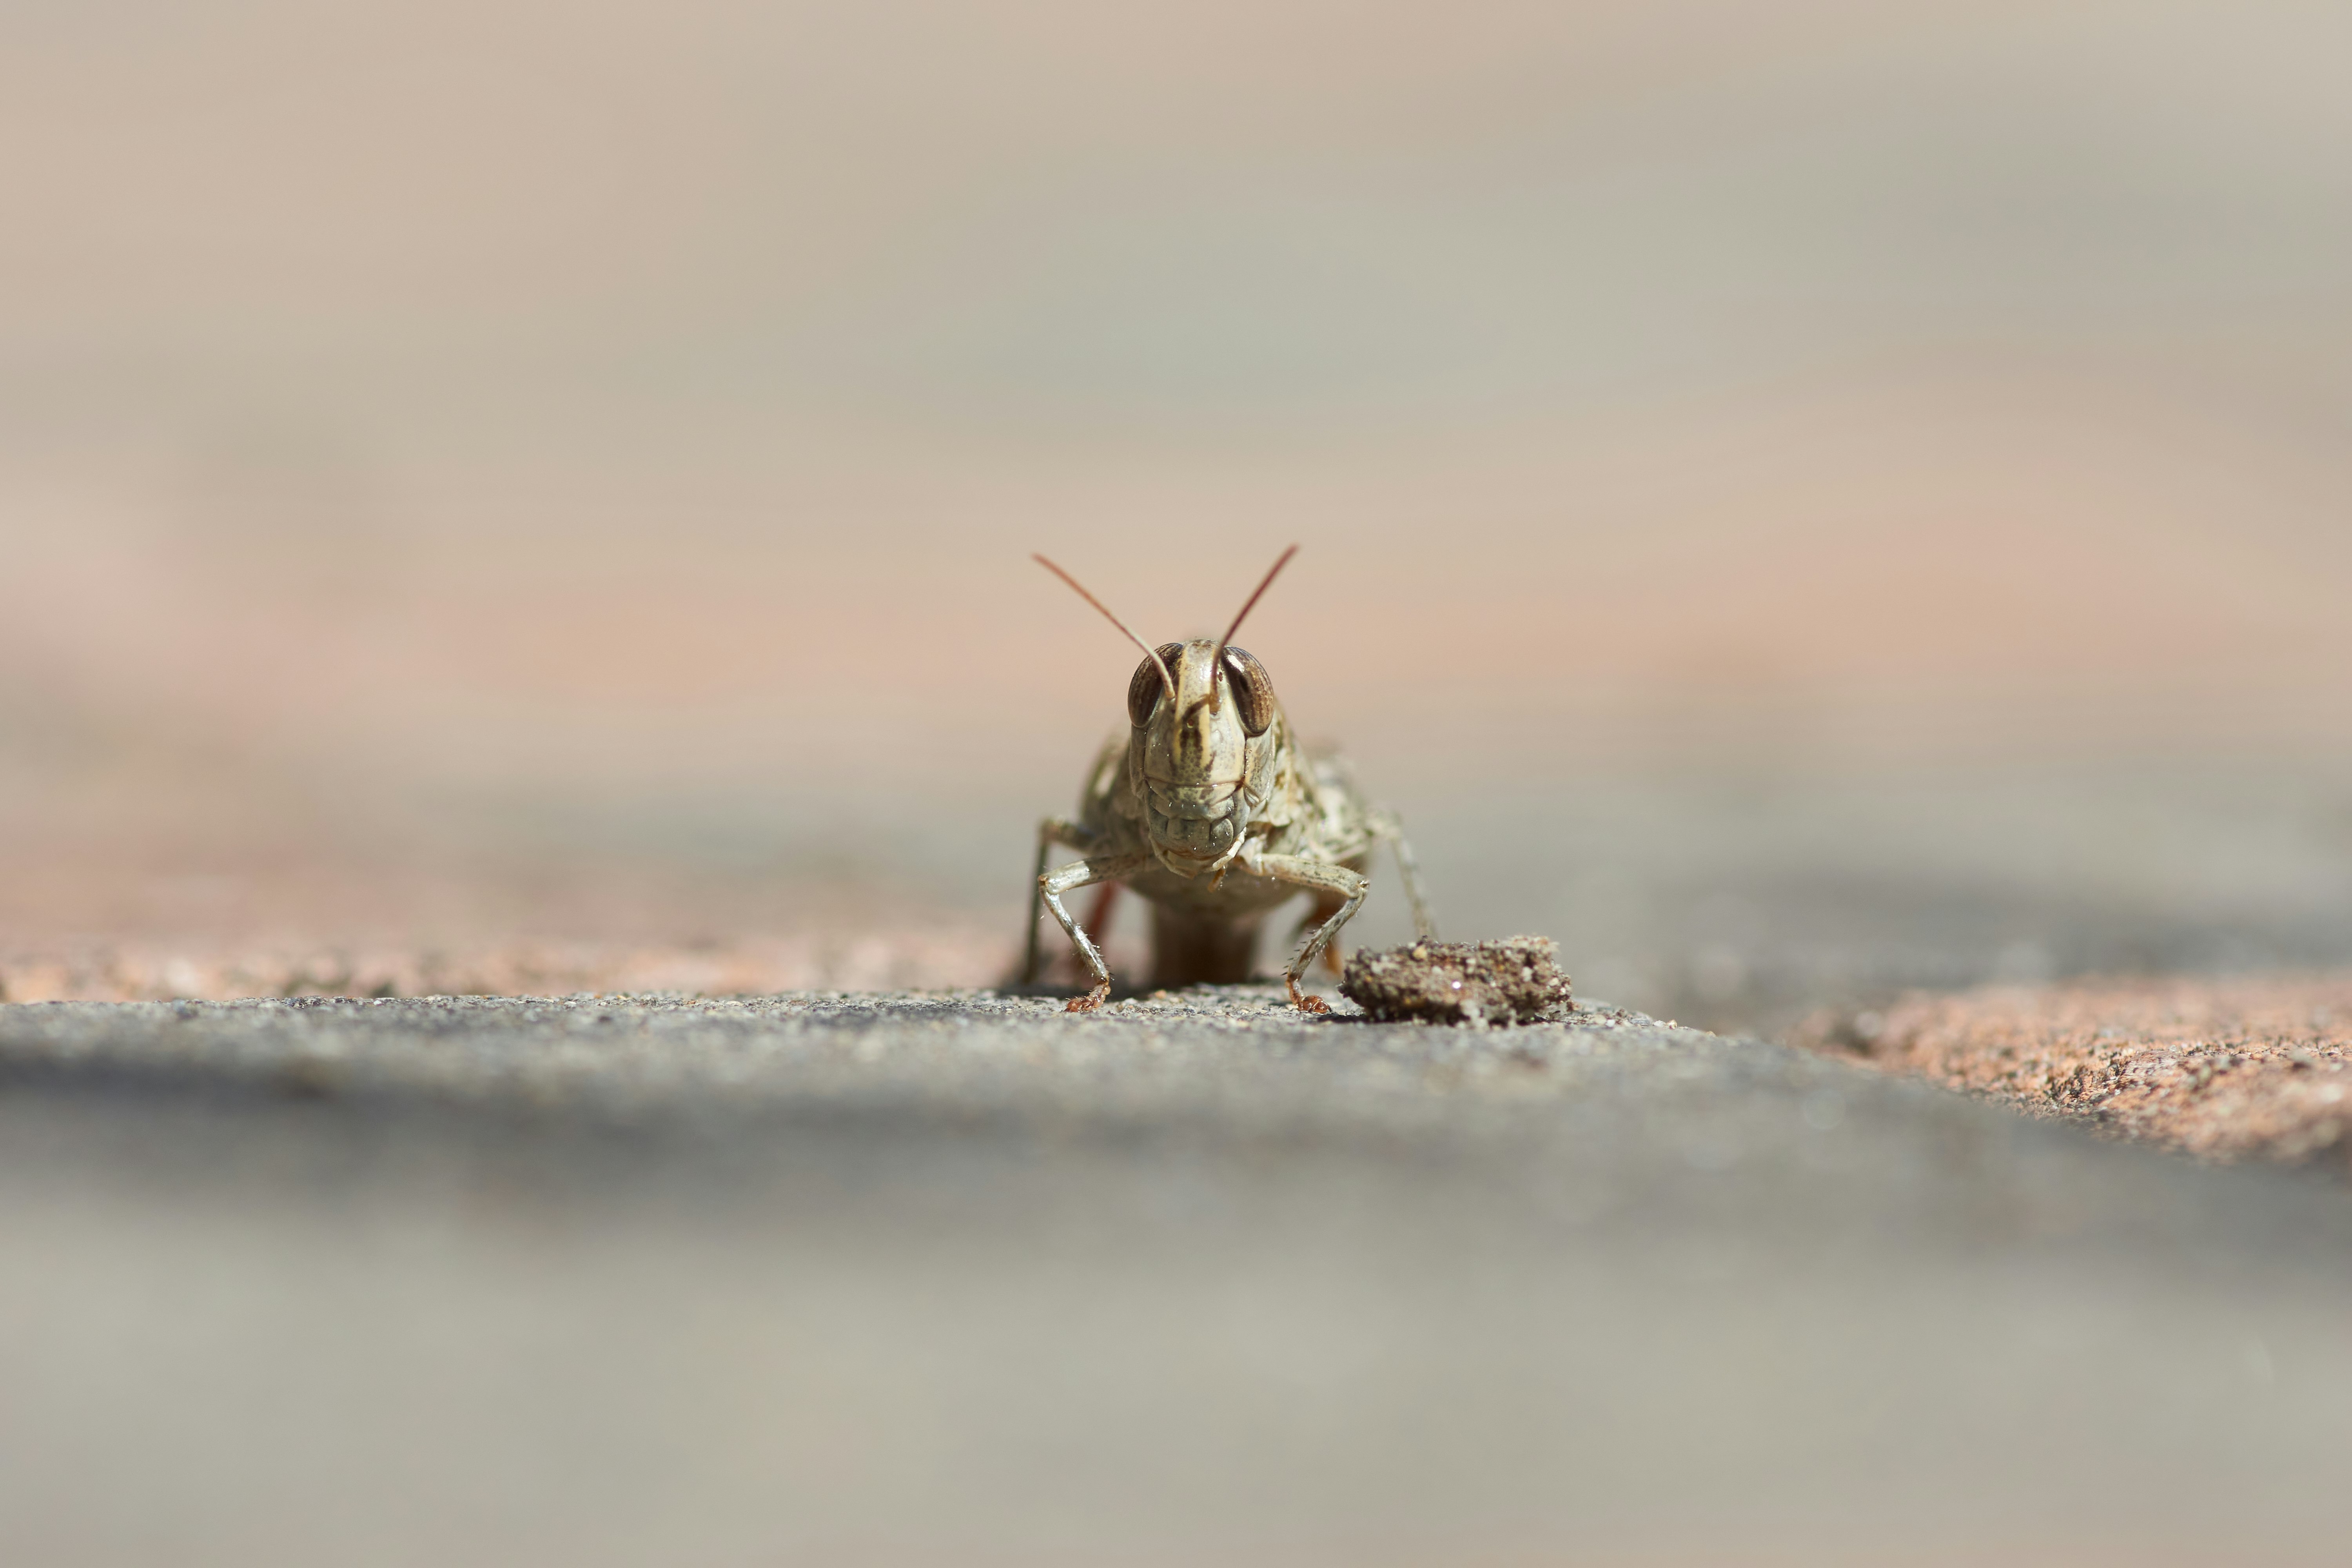 brown and white grasshopper on gray concrete ground during daytime